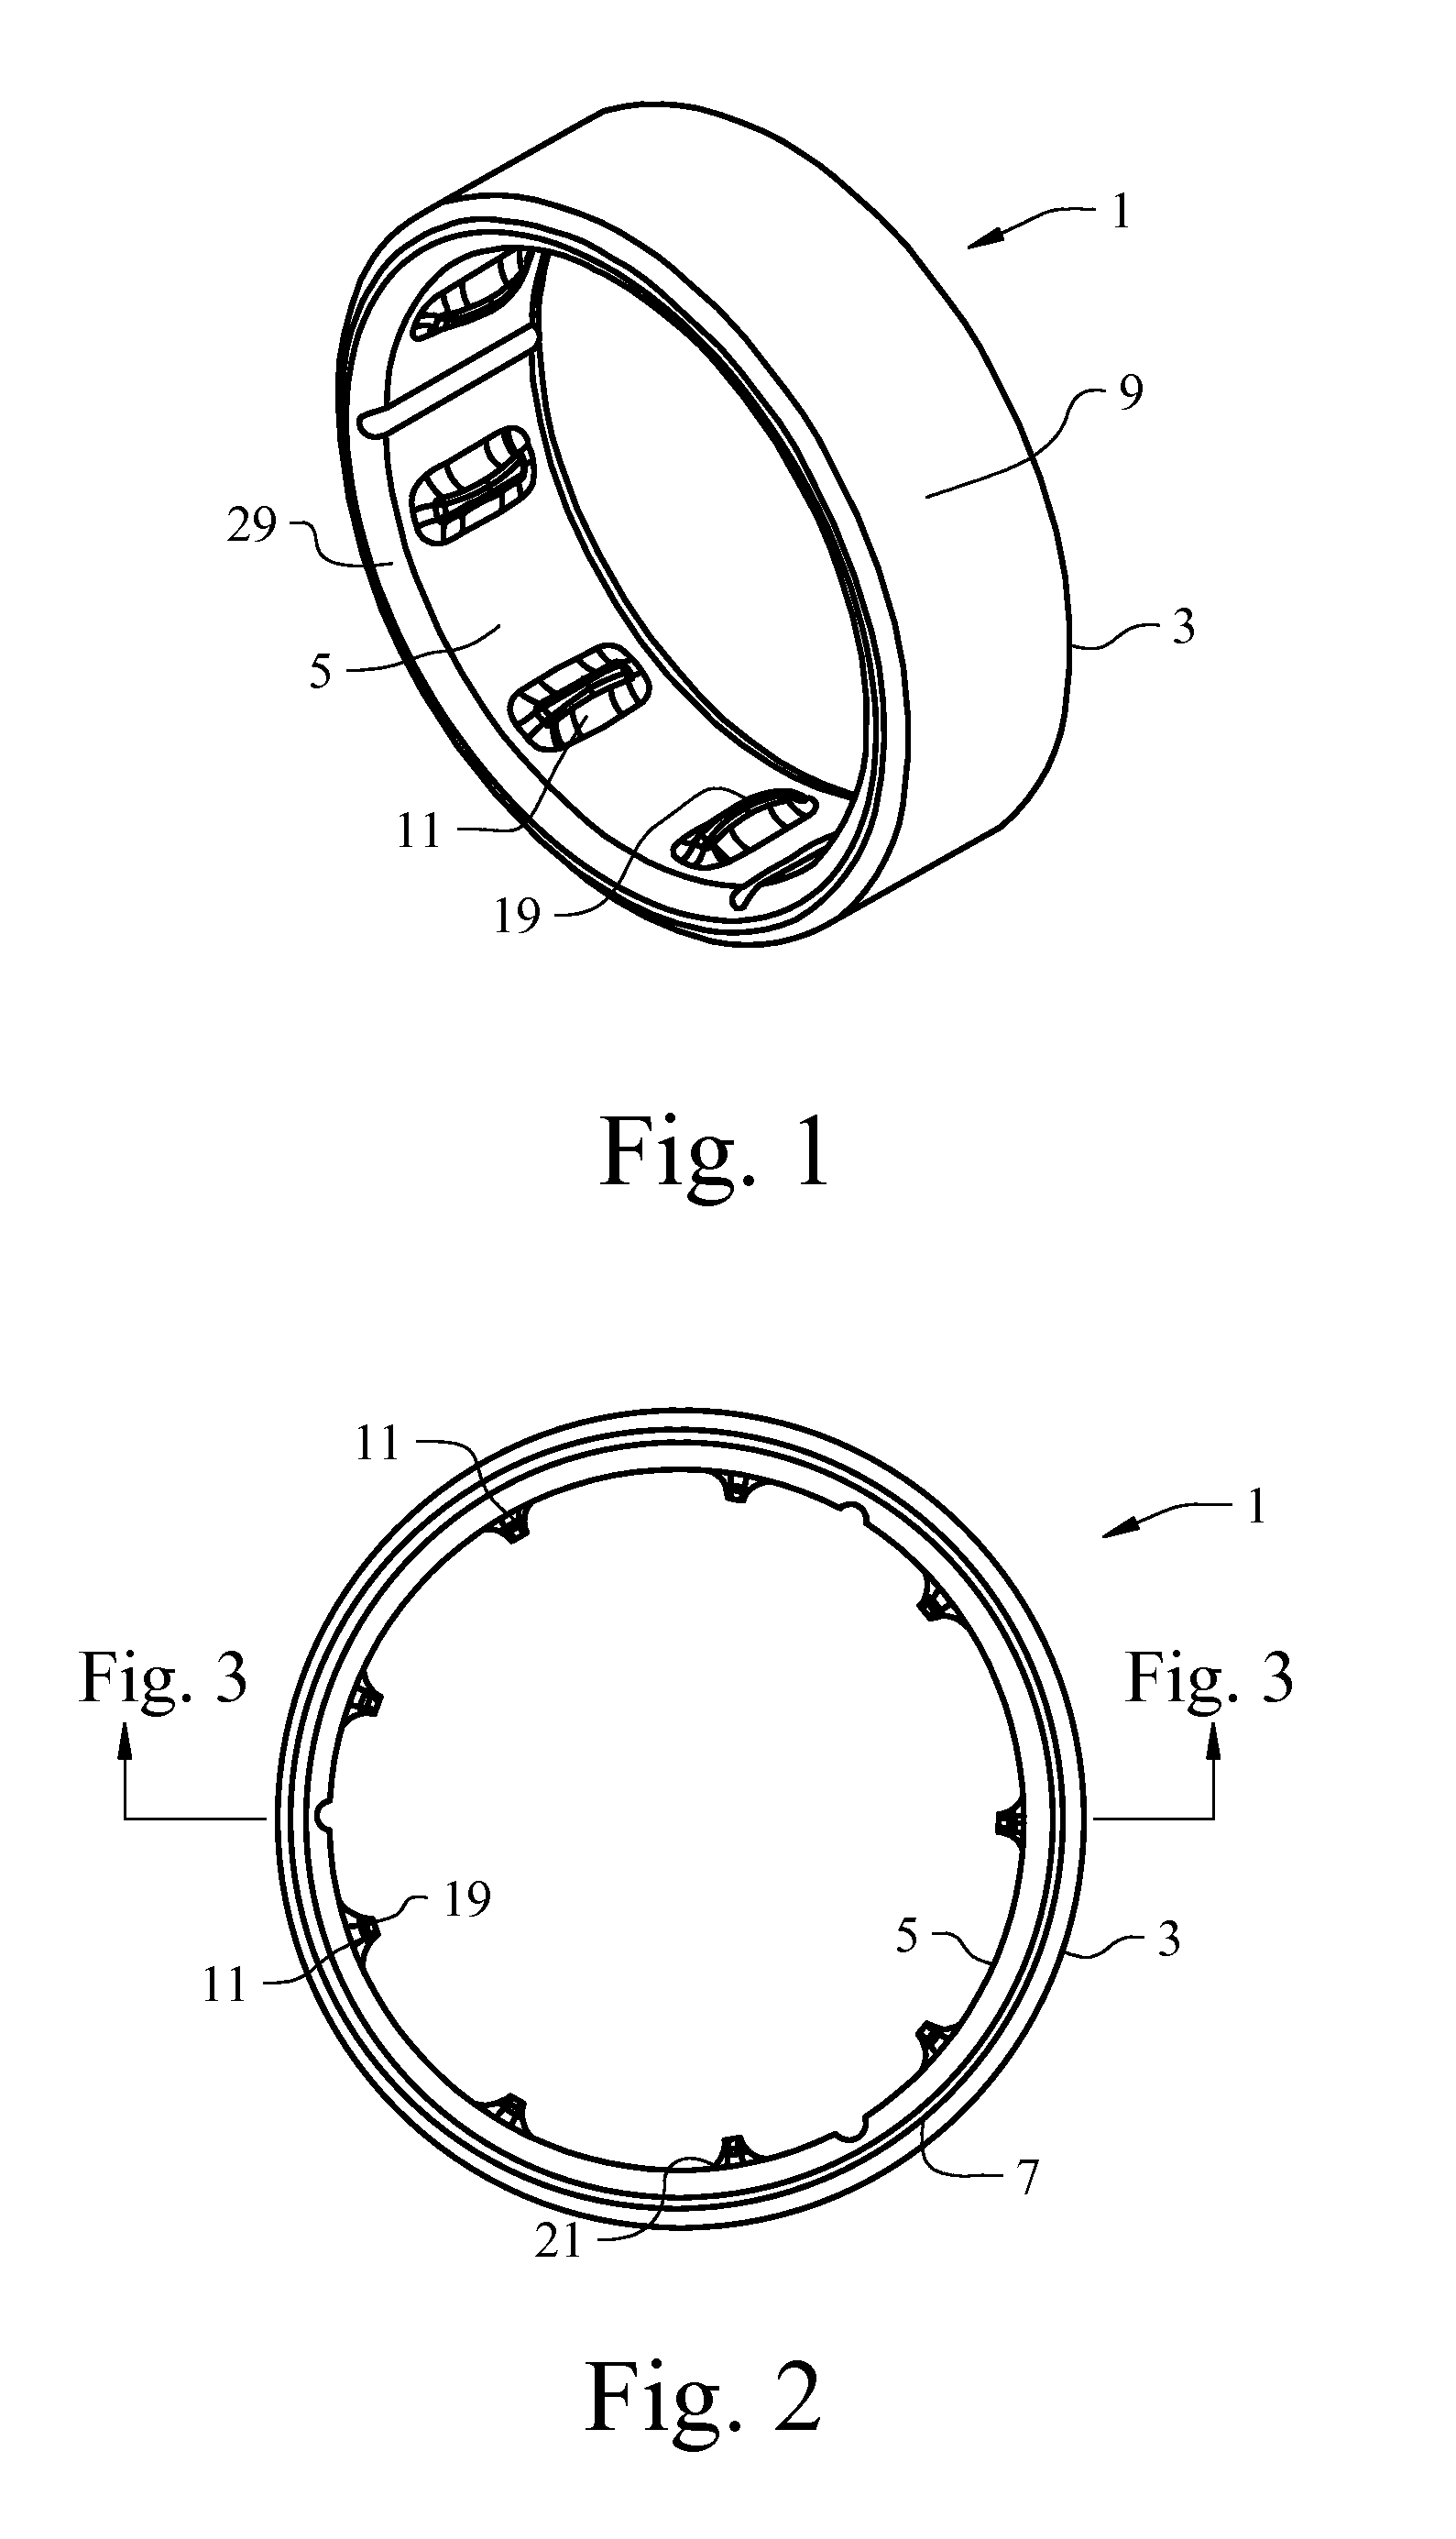 Finger ring with size-accommodating inner liner